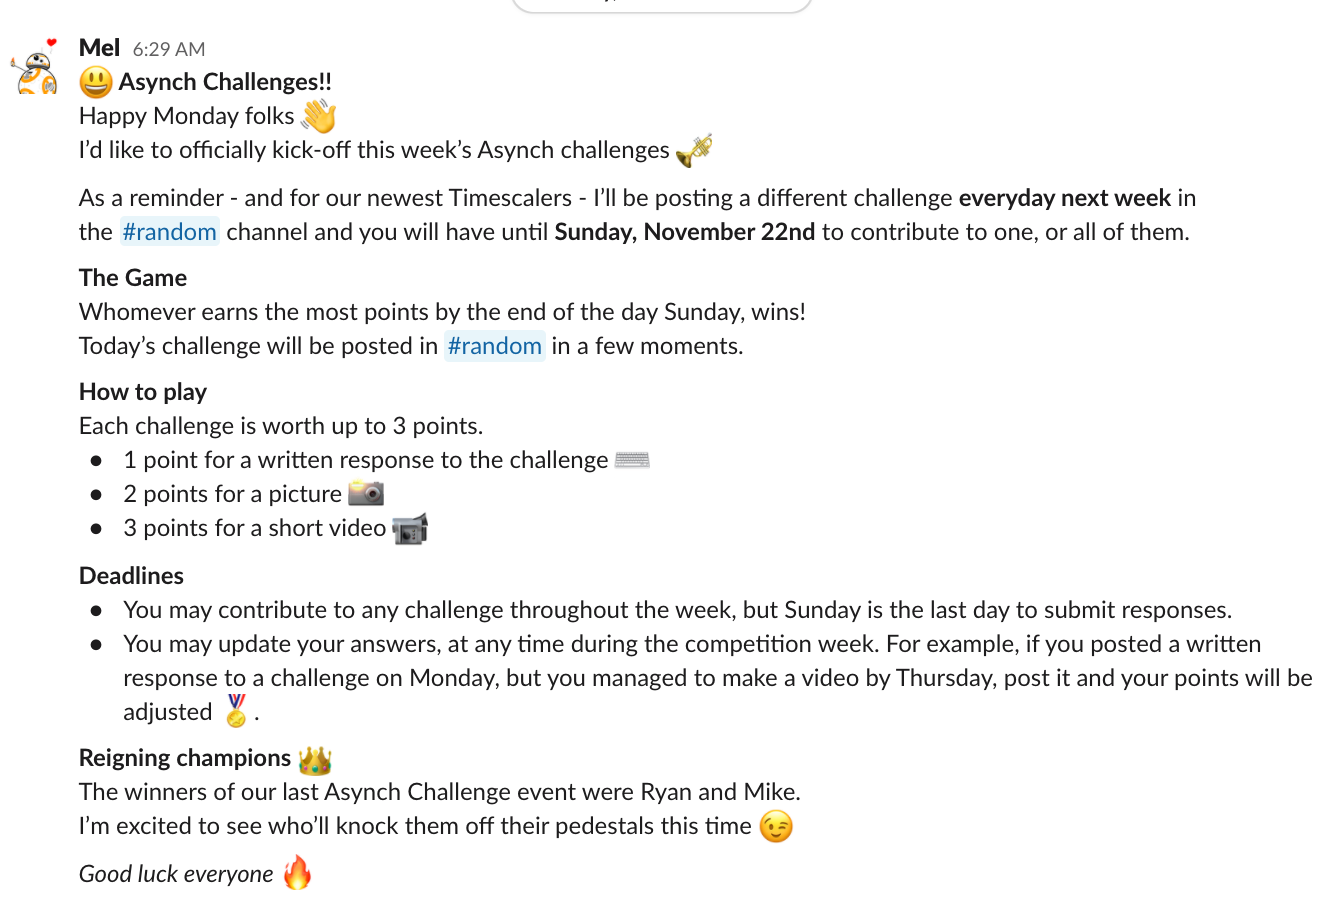 Screenshot of Slack message with async challenge rules, deadlines, and reigning champions